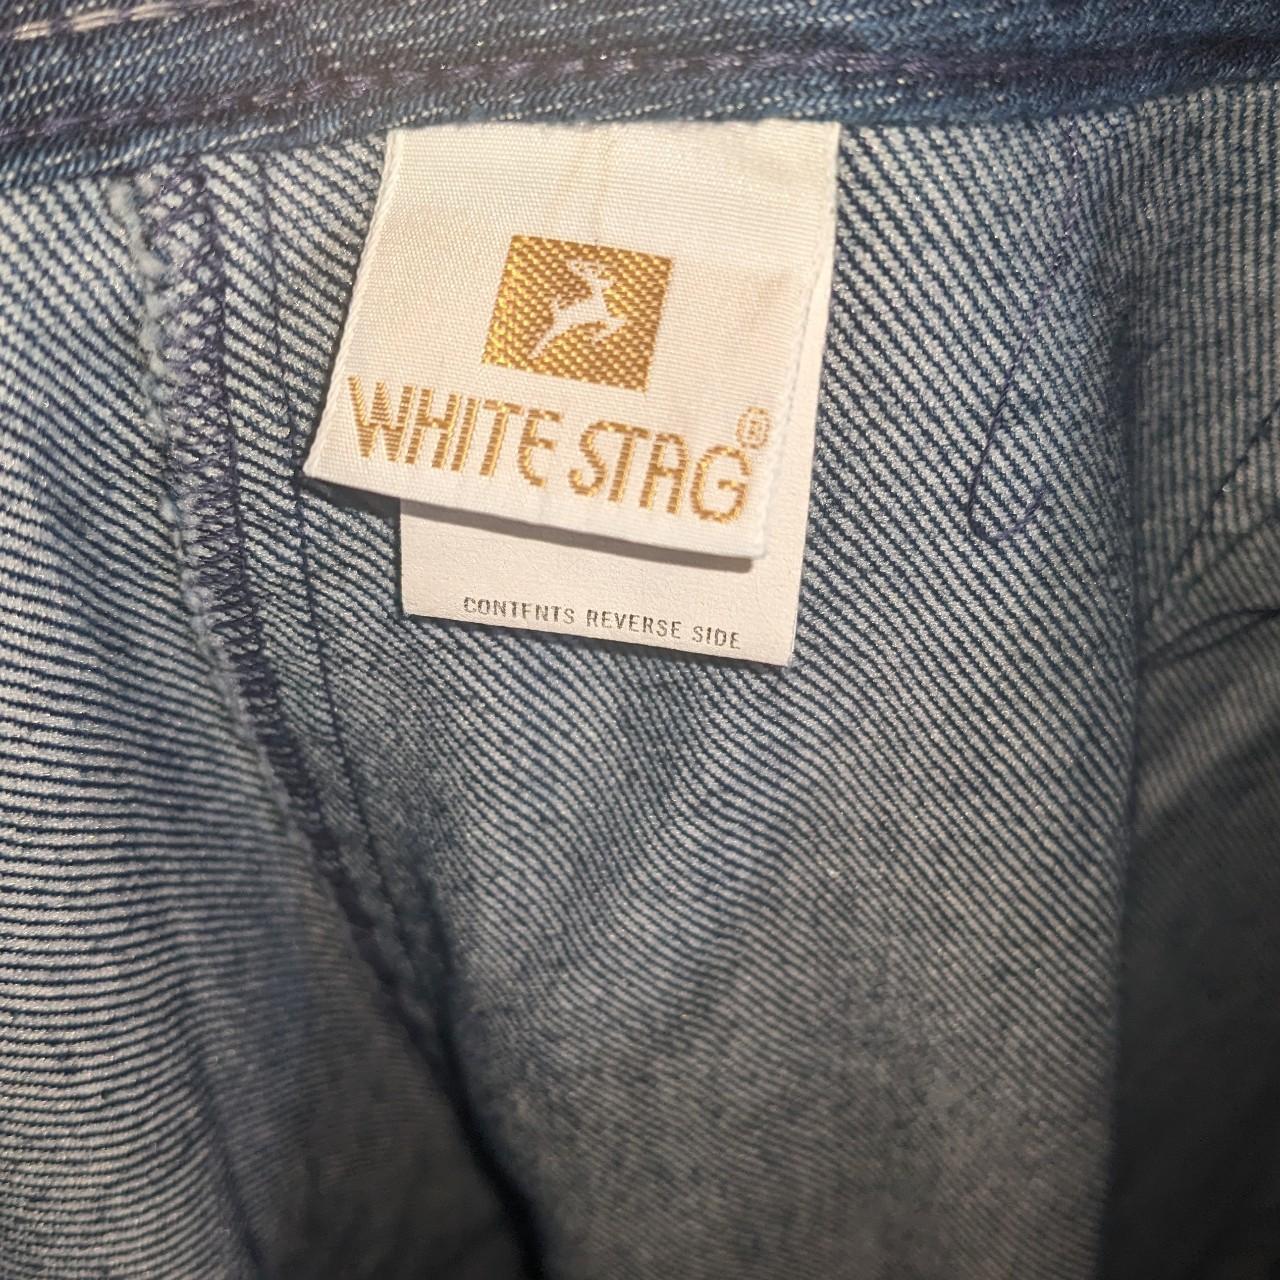 White Stag Women's Blue Jeans (4)